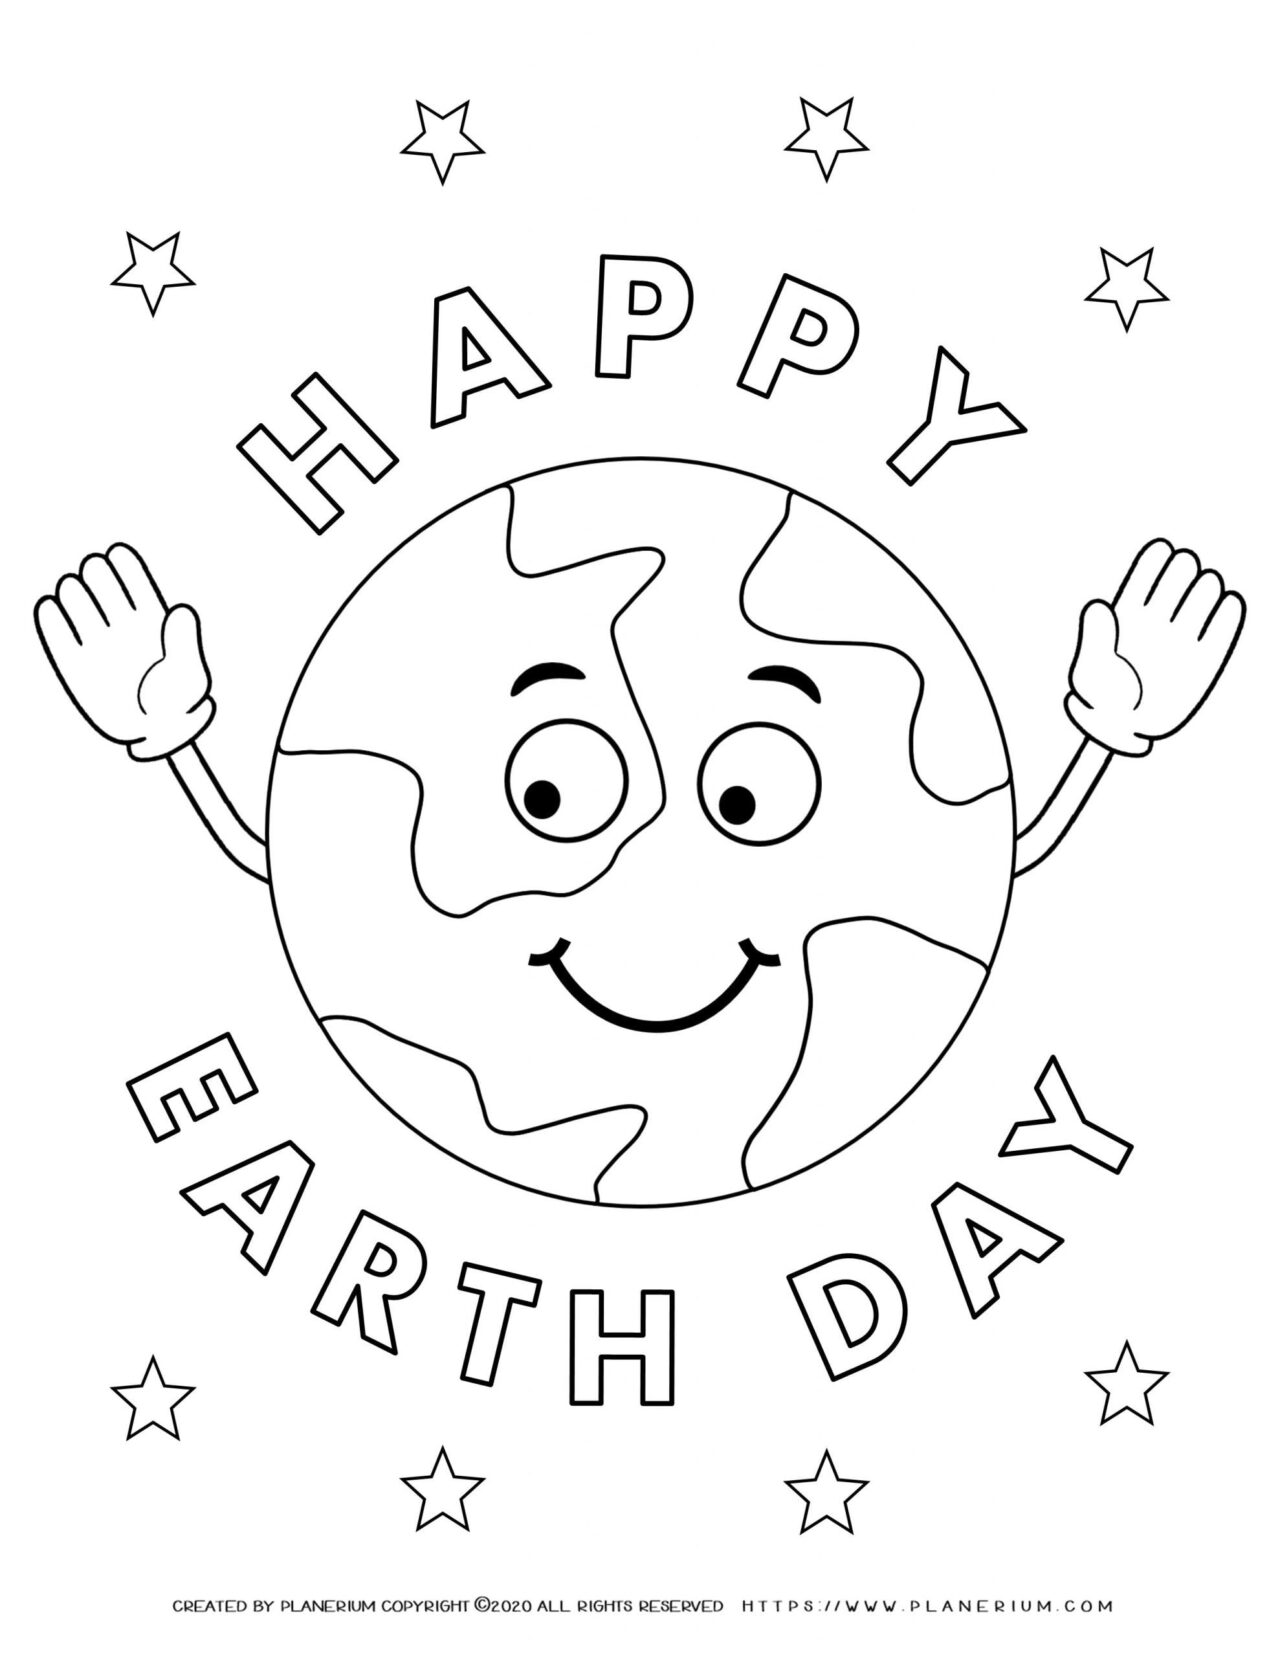 Earth Day Coloring Page: Free Printable Happy Earth Day Coloring Page ...